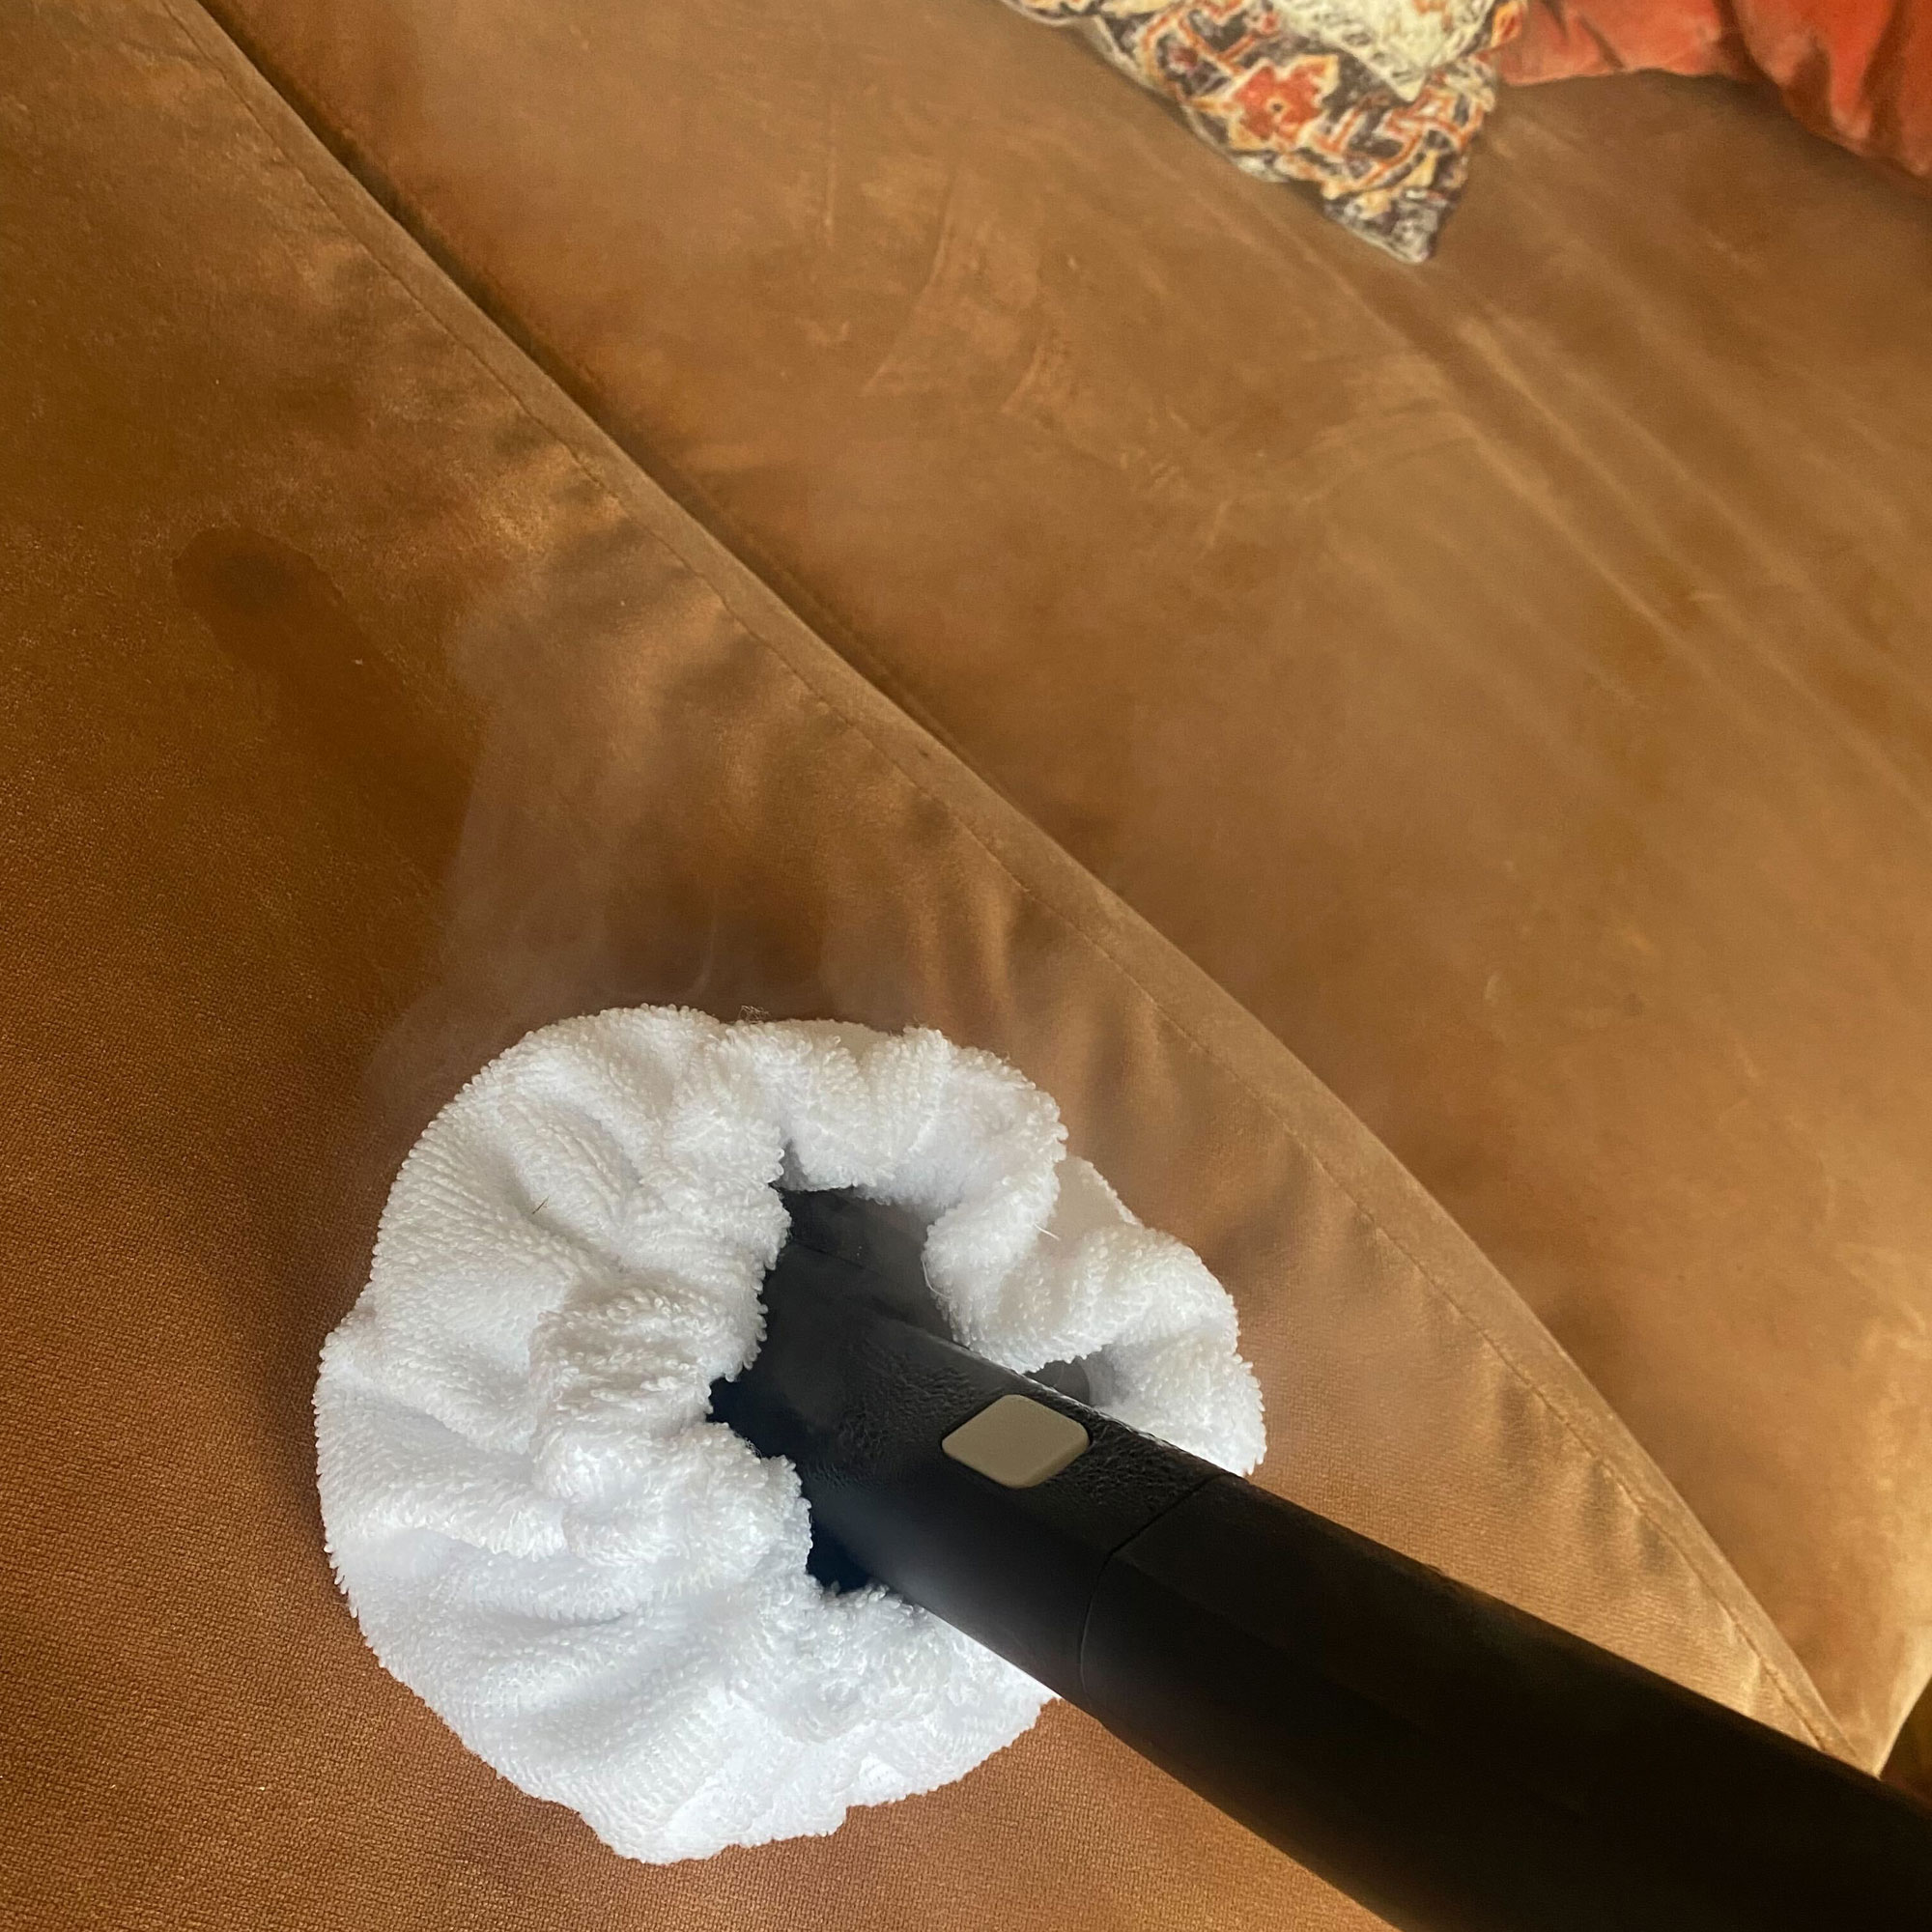 using the dupray neat steam cleaner on sofa